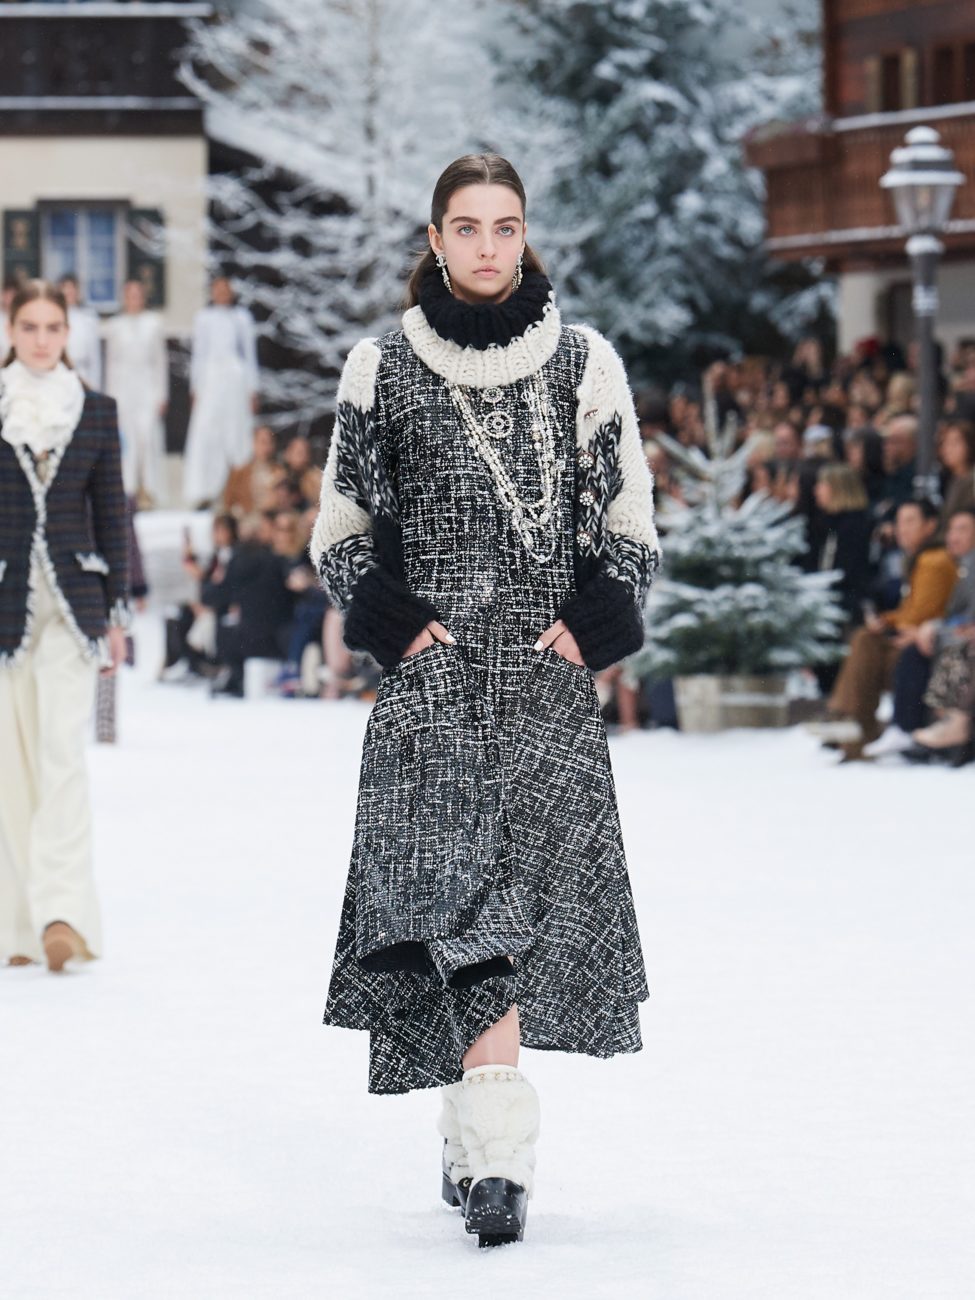 Chanel FW 2019 Collection, Courtesy of Chanel